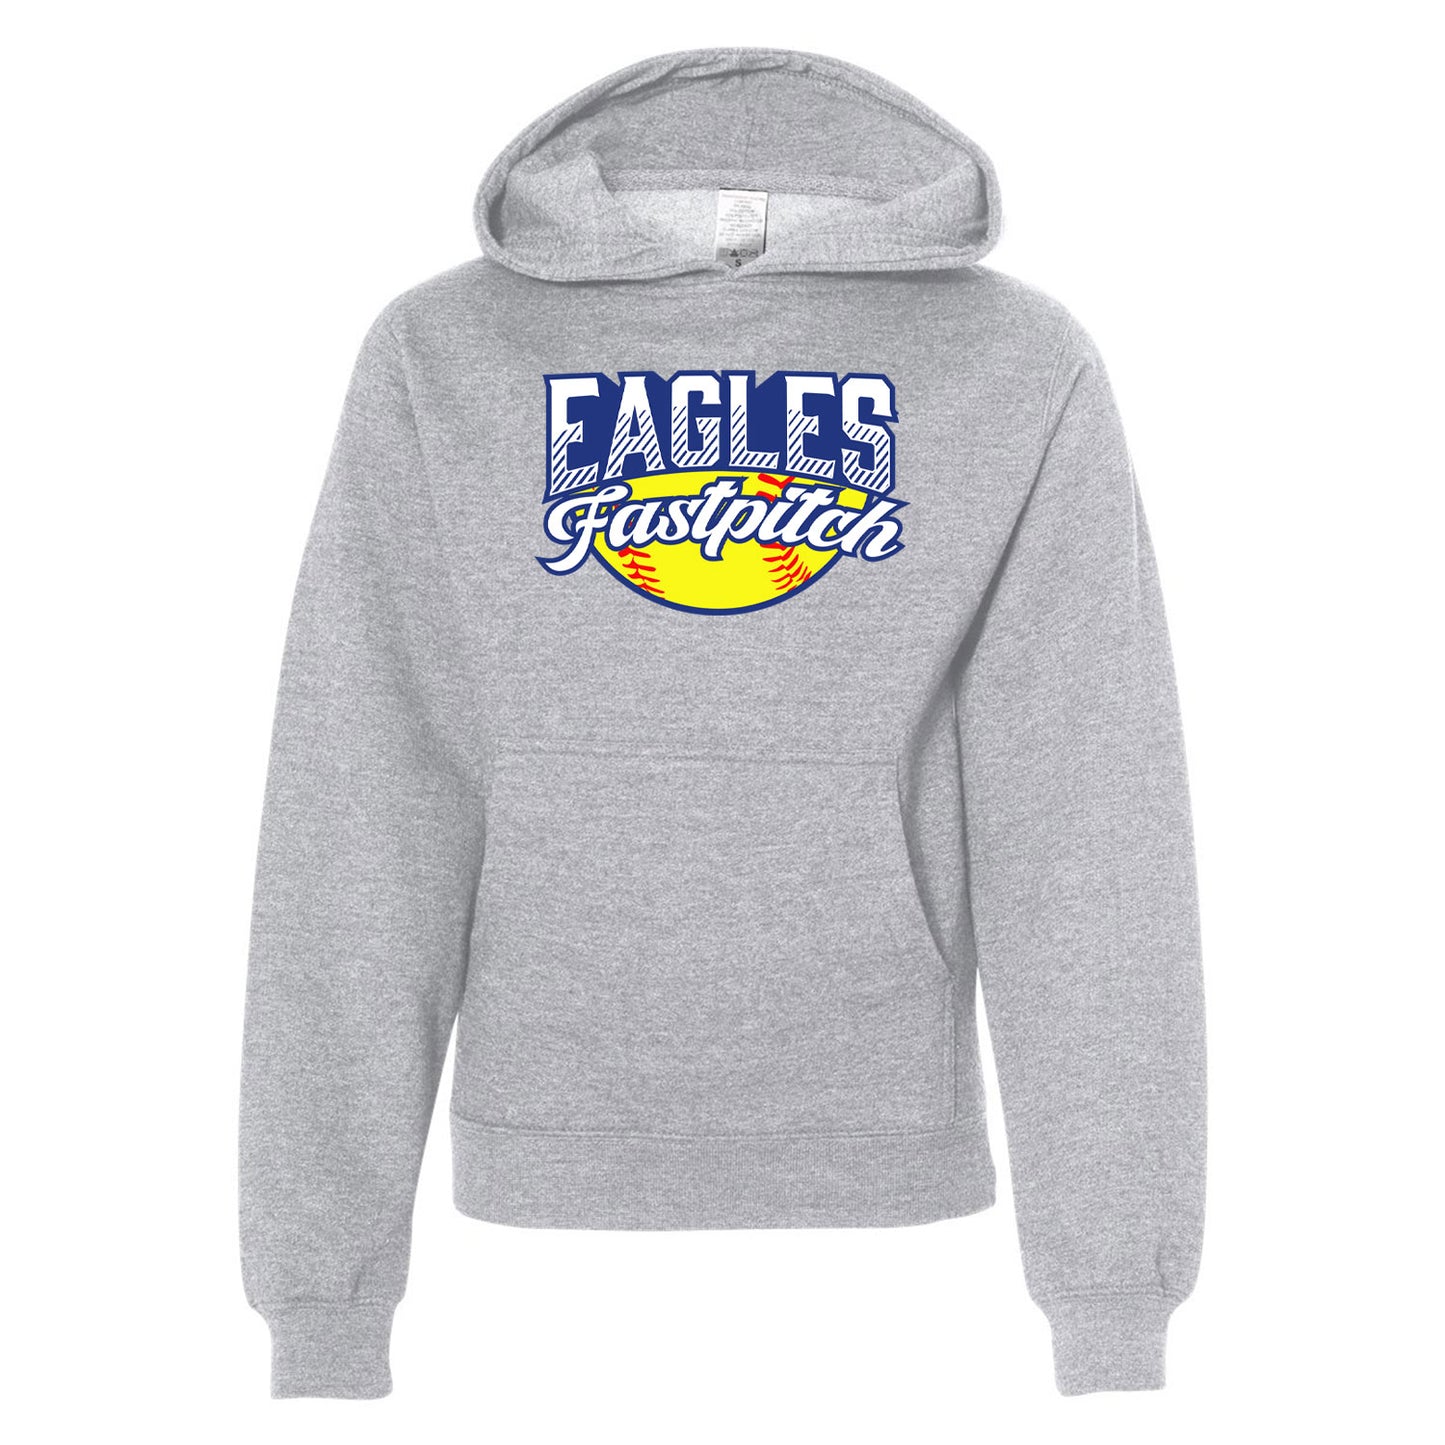 Youth Pullover Hoodie (Eagles Fastpitch)